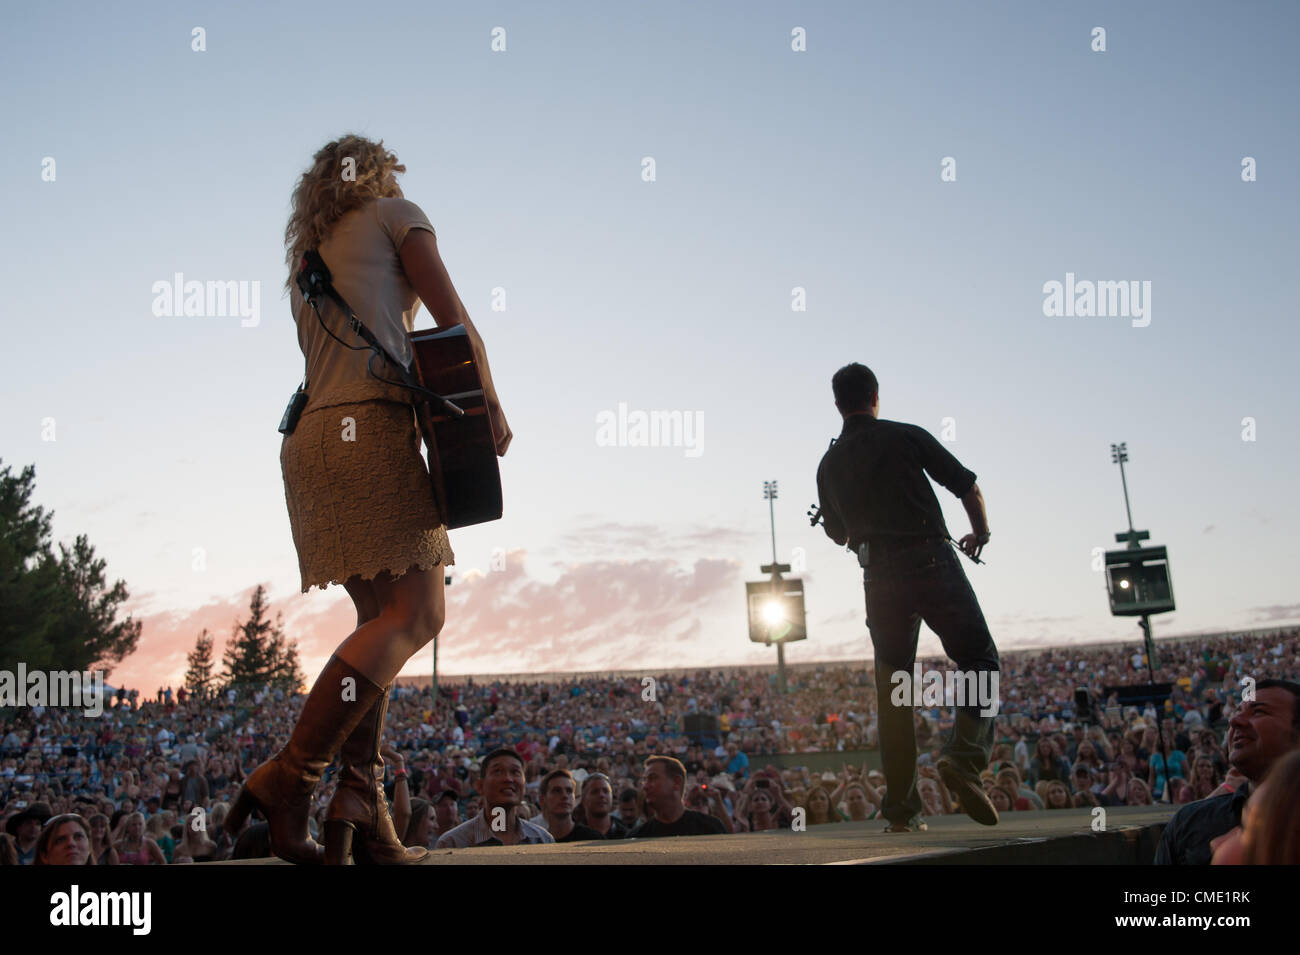 WHEATLAND, CA – July 23: The Band Perry opens for Brad Paisley for The Escape Virtual Reality World Tour at Sleep Train Amphitheater in Wheatland, California on July 23, 2011 Stock Photo